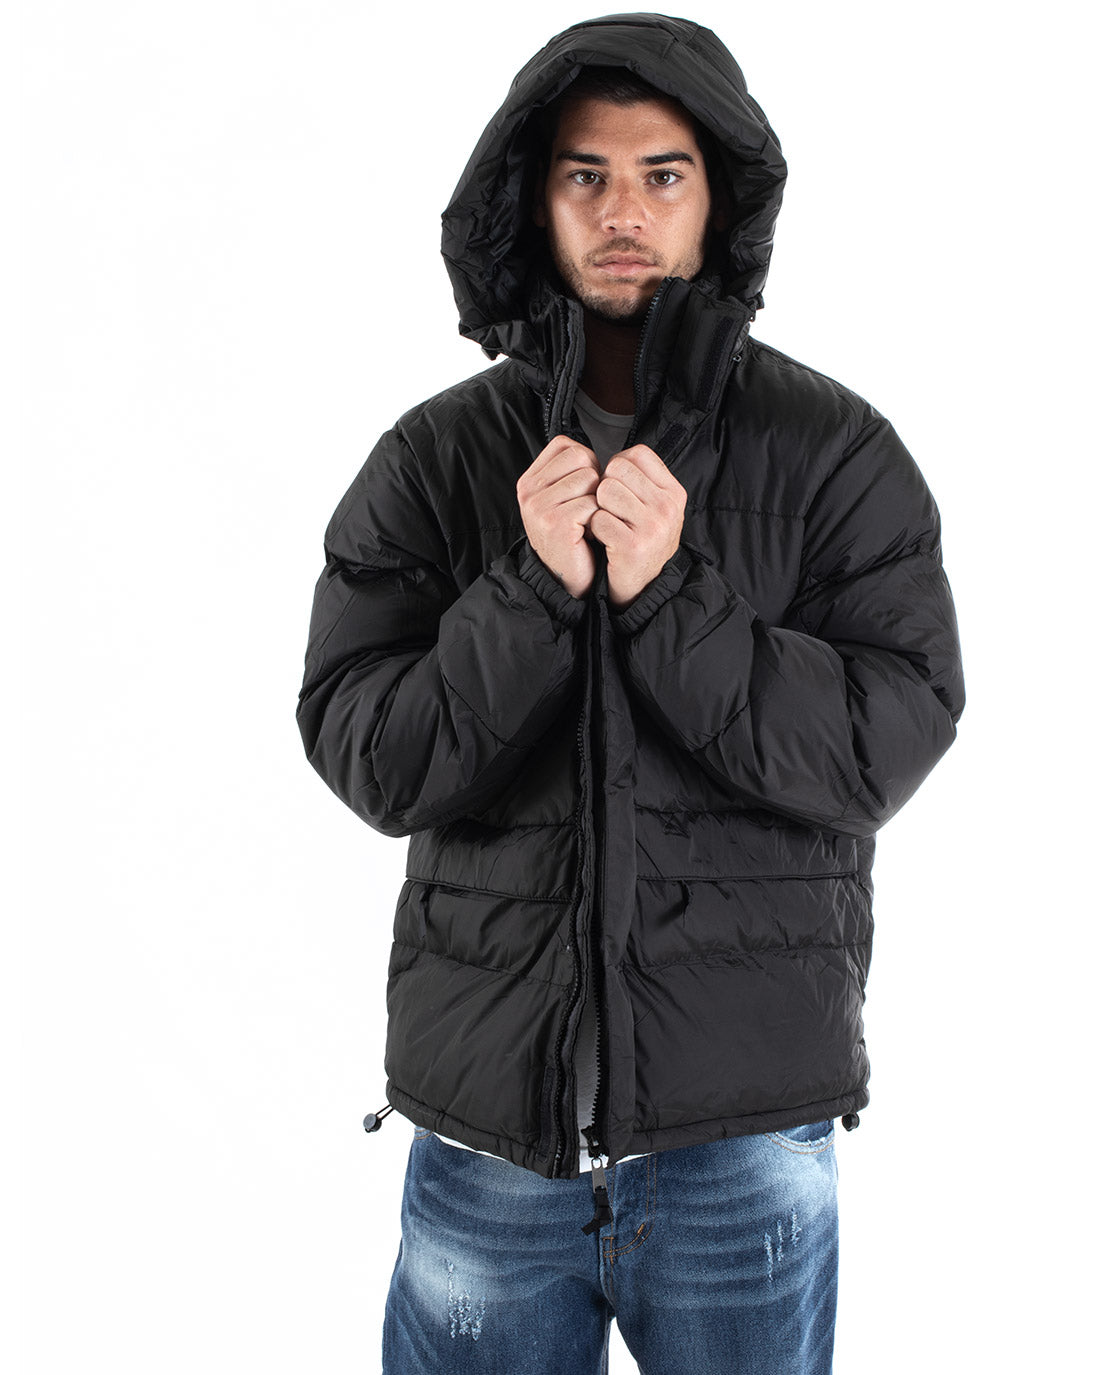 Men's Bomber Jacket Solid Color Black Casual Padded Hood GIOSAL-G2937A